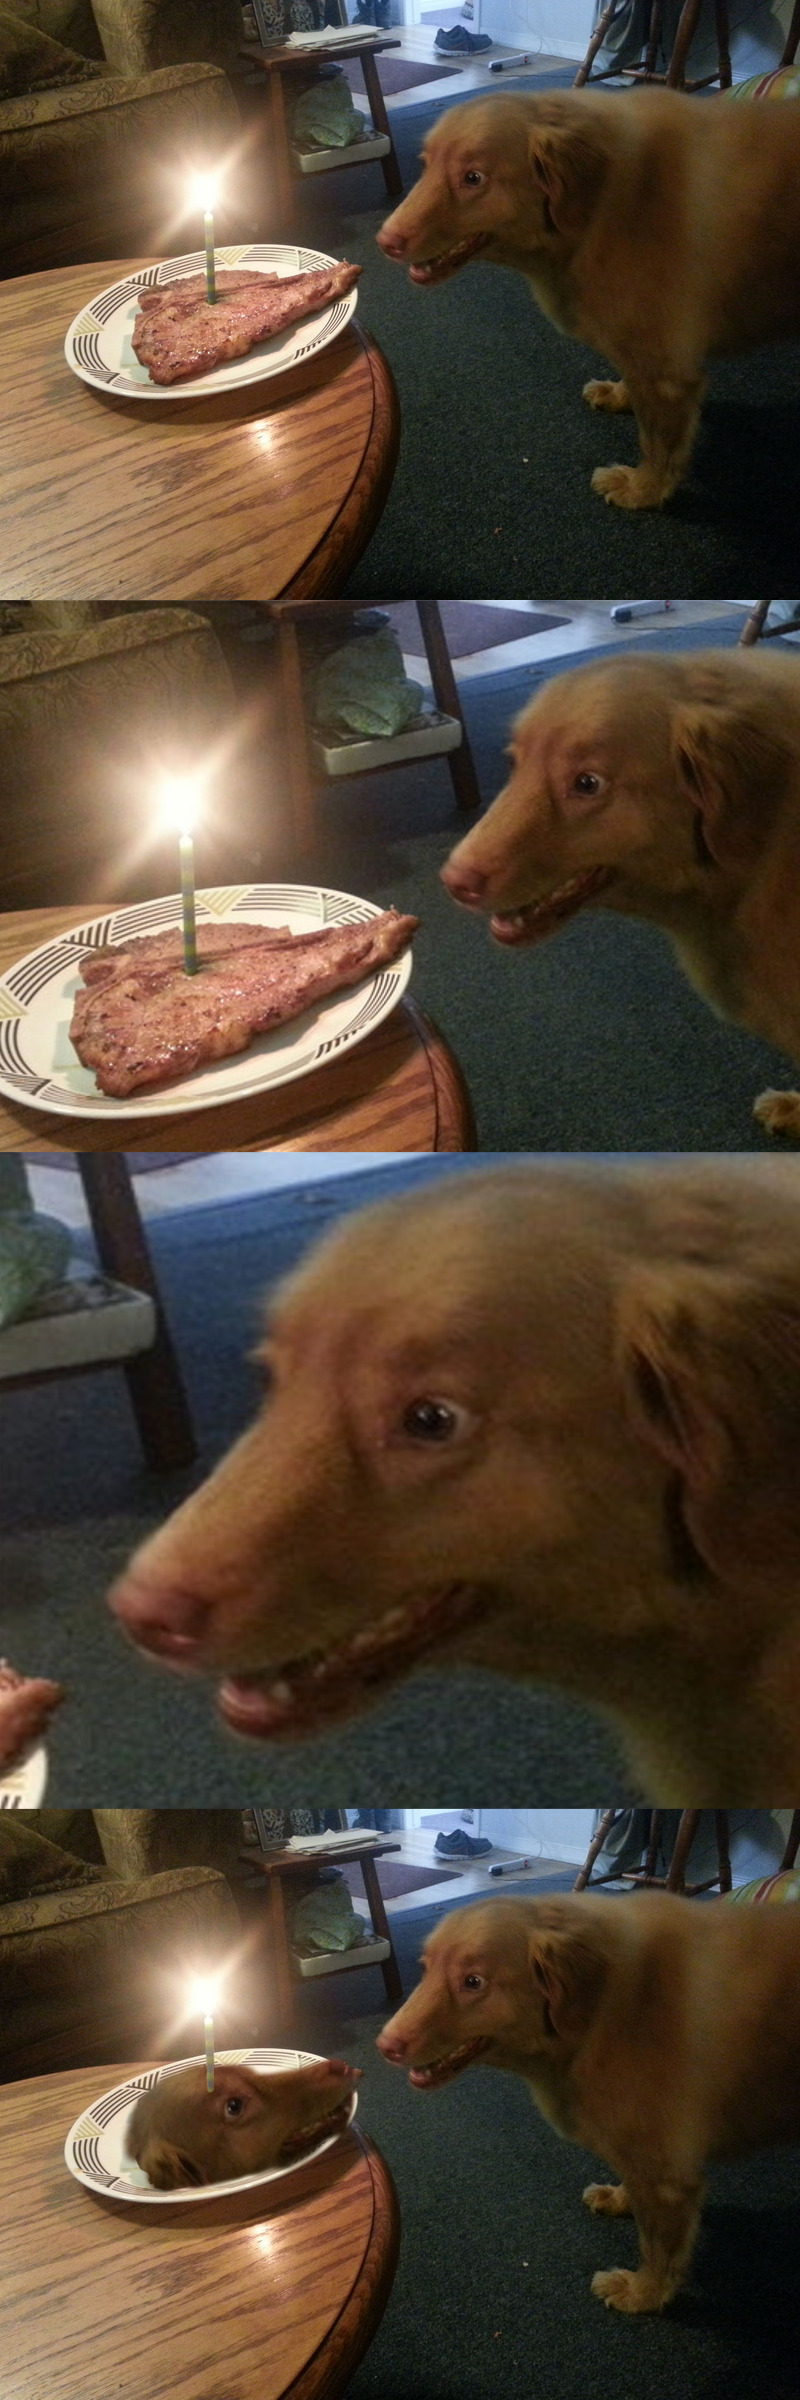 dog gets pizza for his birthday and see's himself in the pizza.